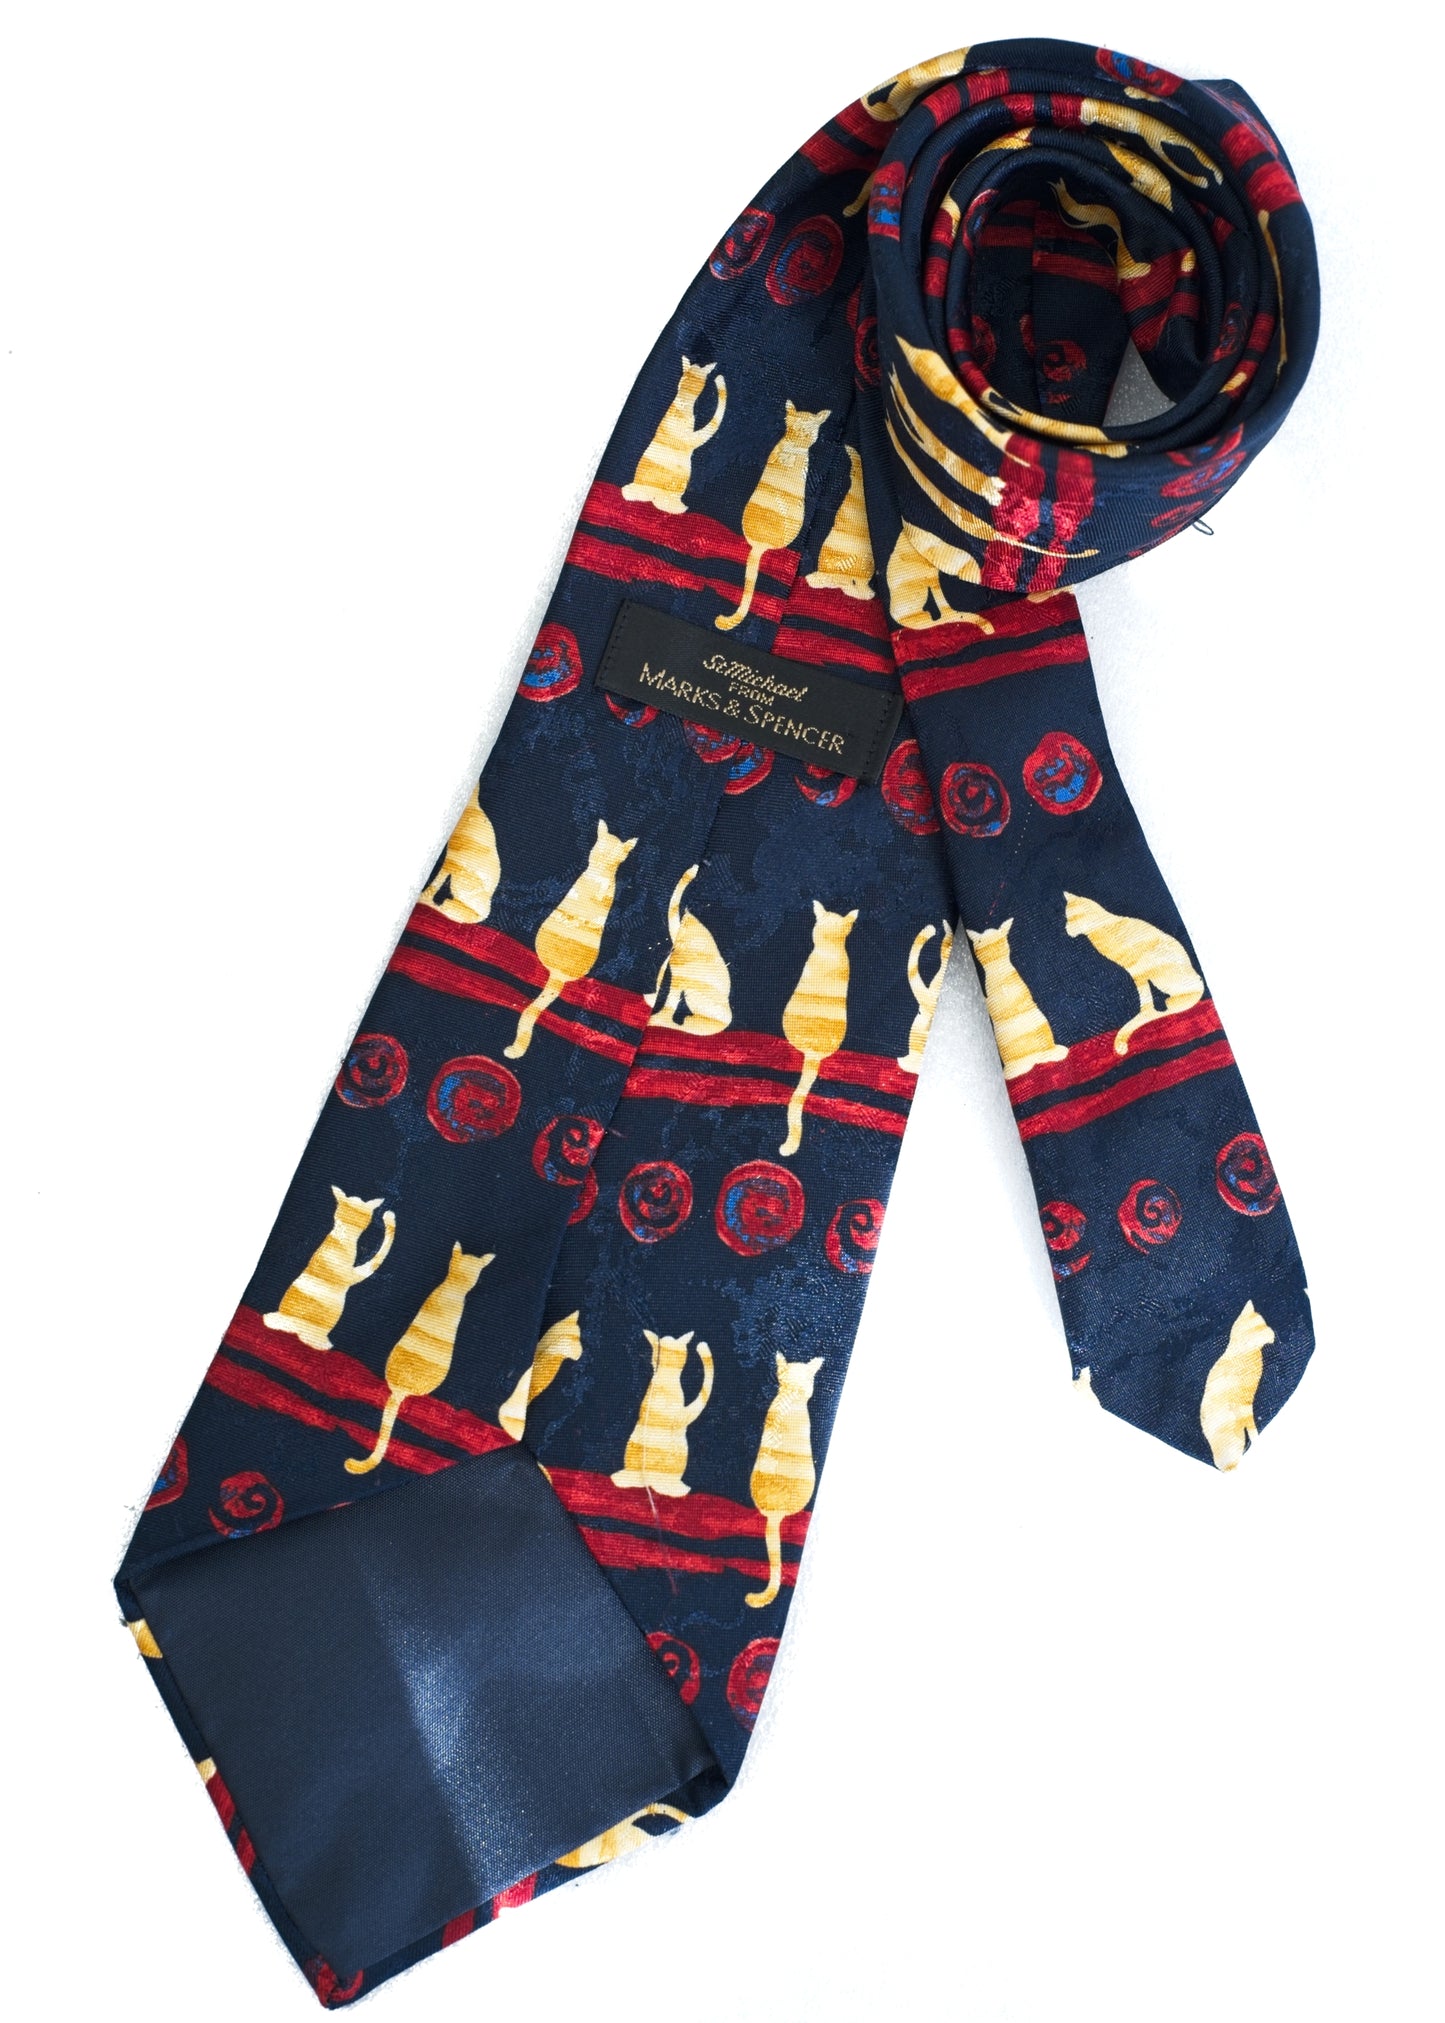 Vintage Blue and Yellow Cats Patten Silky Tie • Marks & Spencer